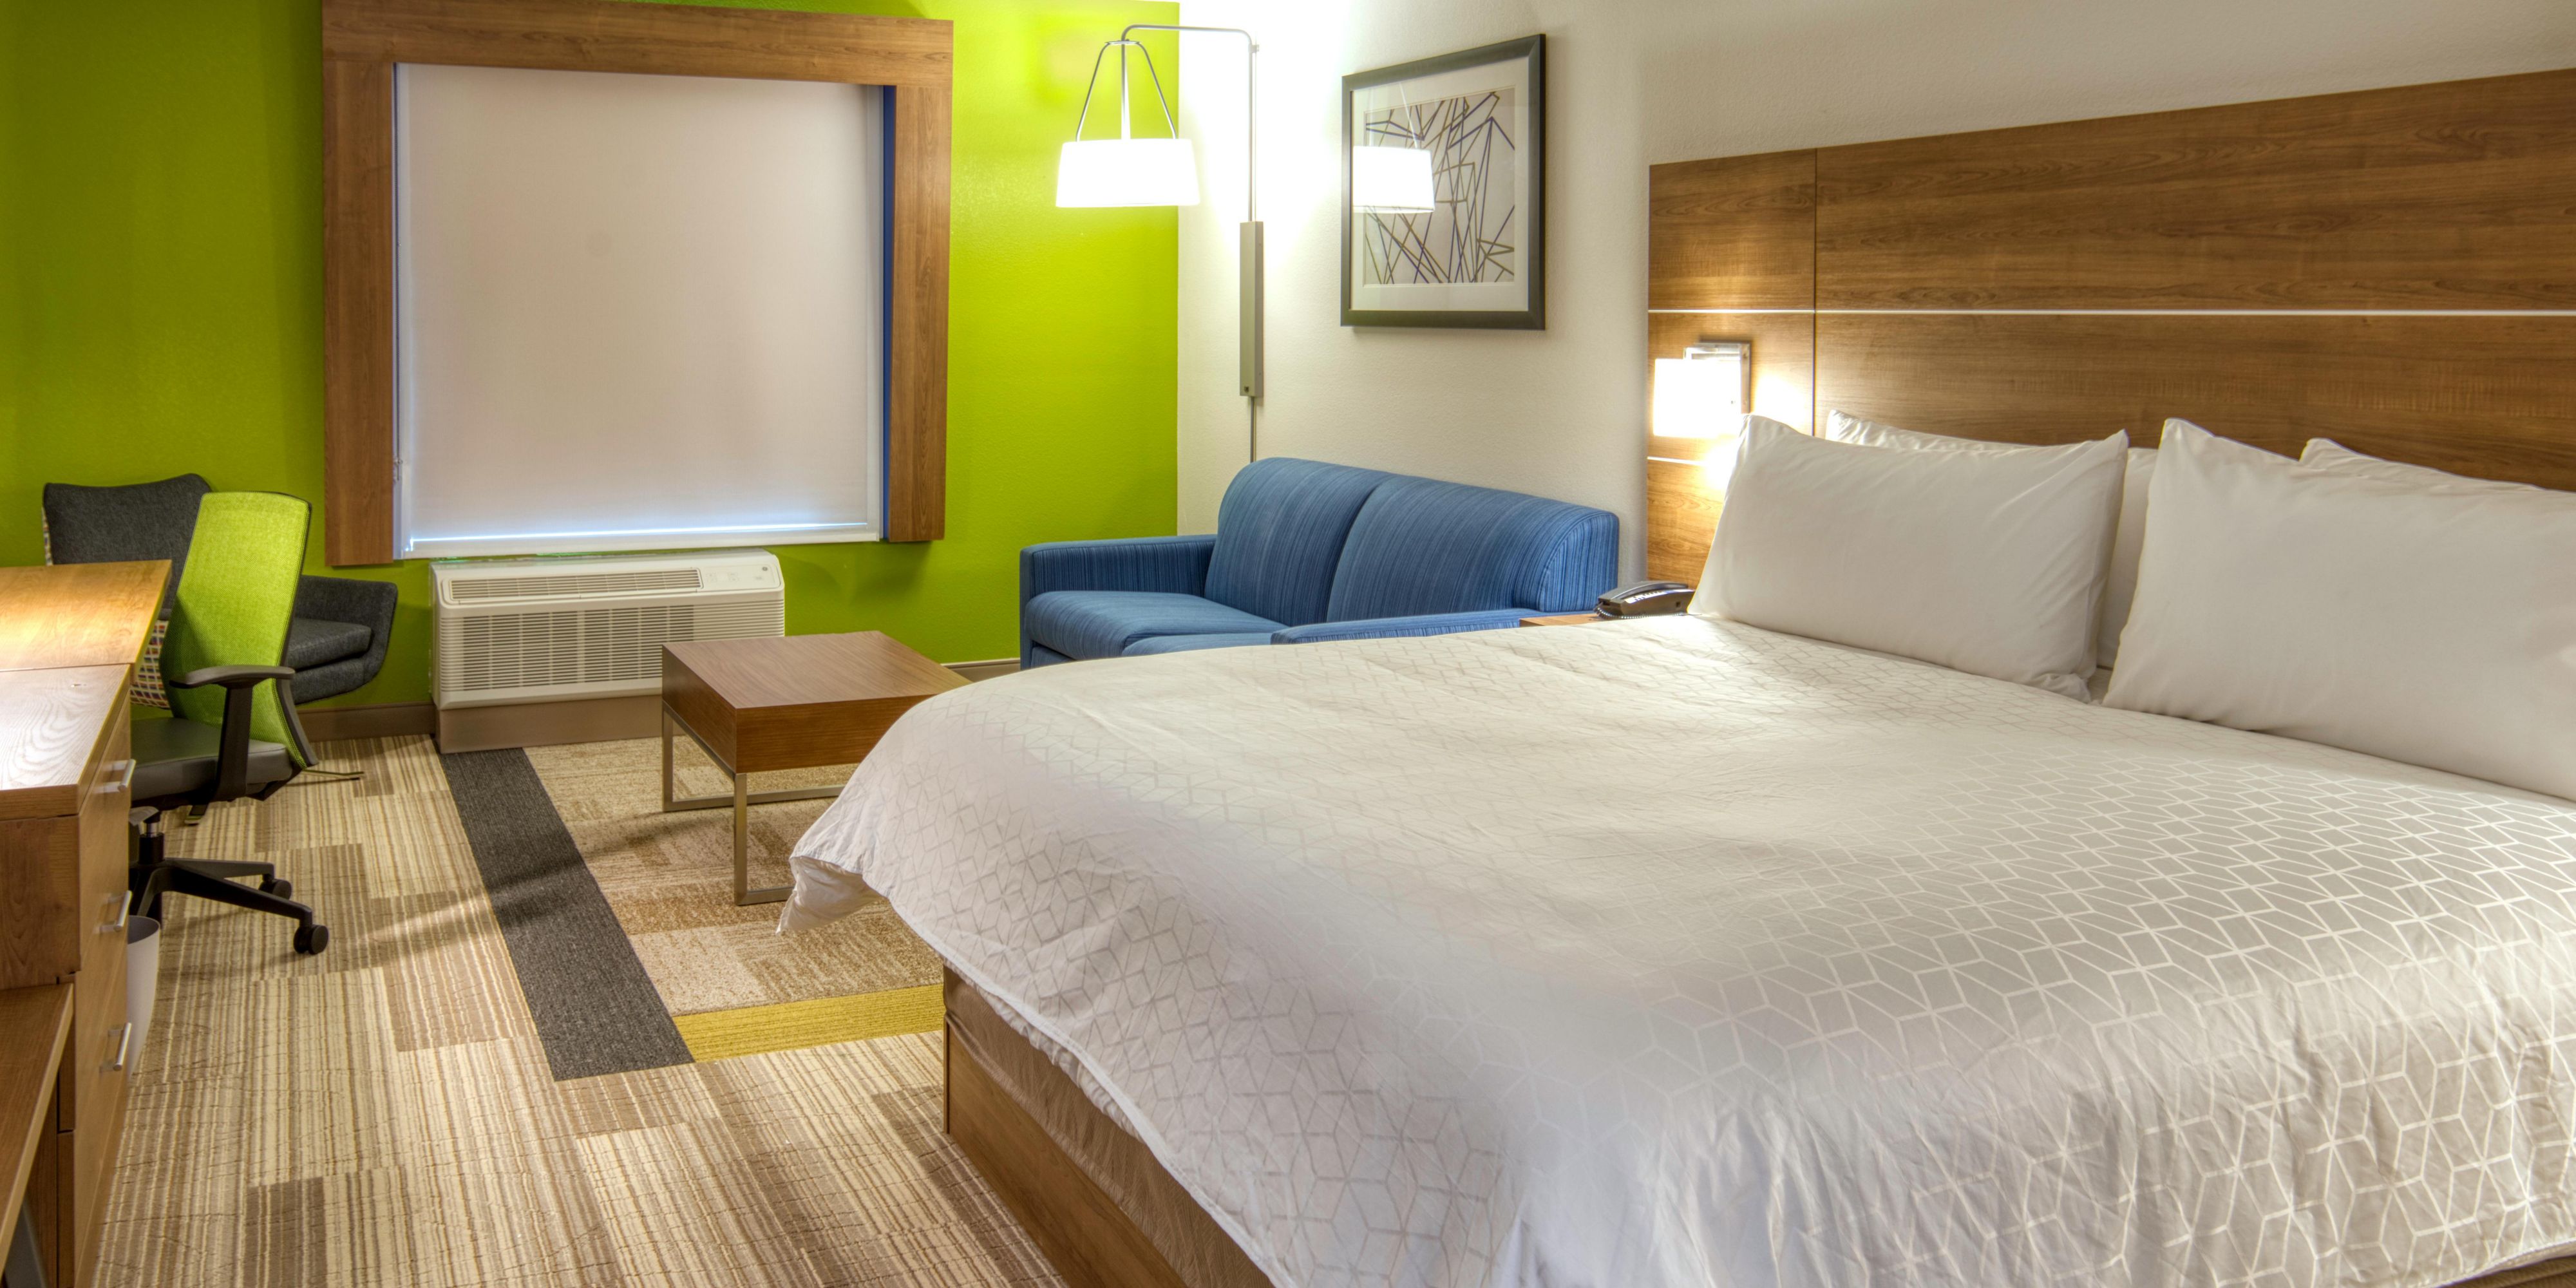 Our guest rooms are complete with a refrigerator and microwave, in room safe, and Keurig Coffee Maker!